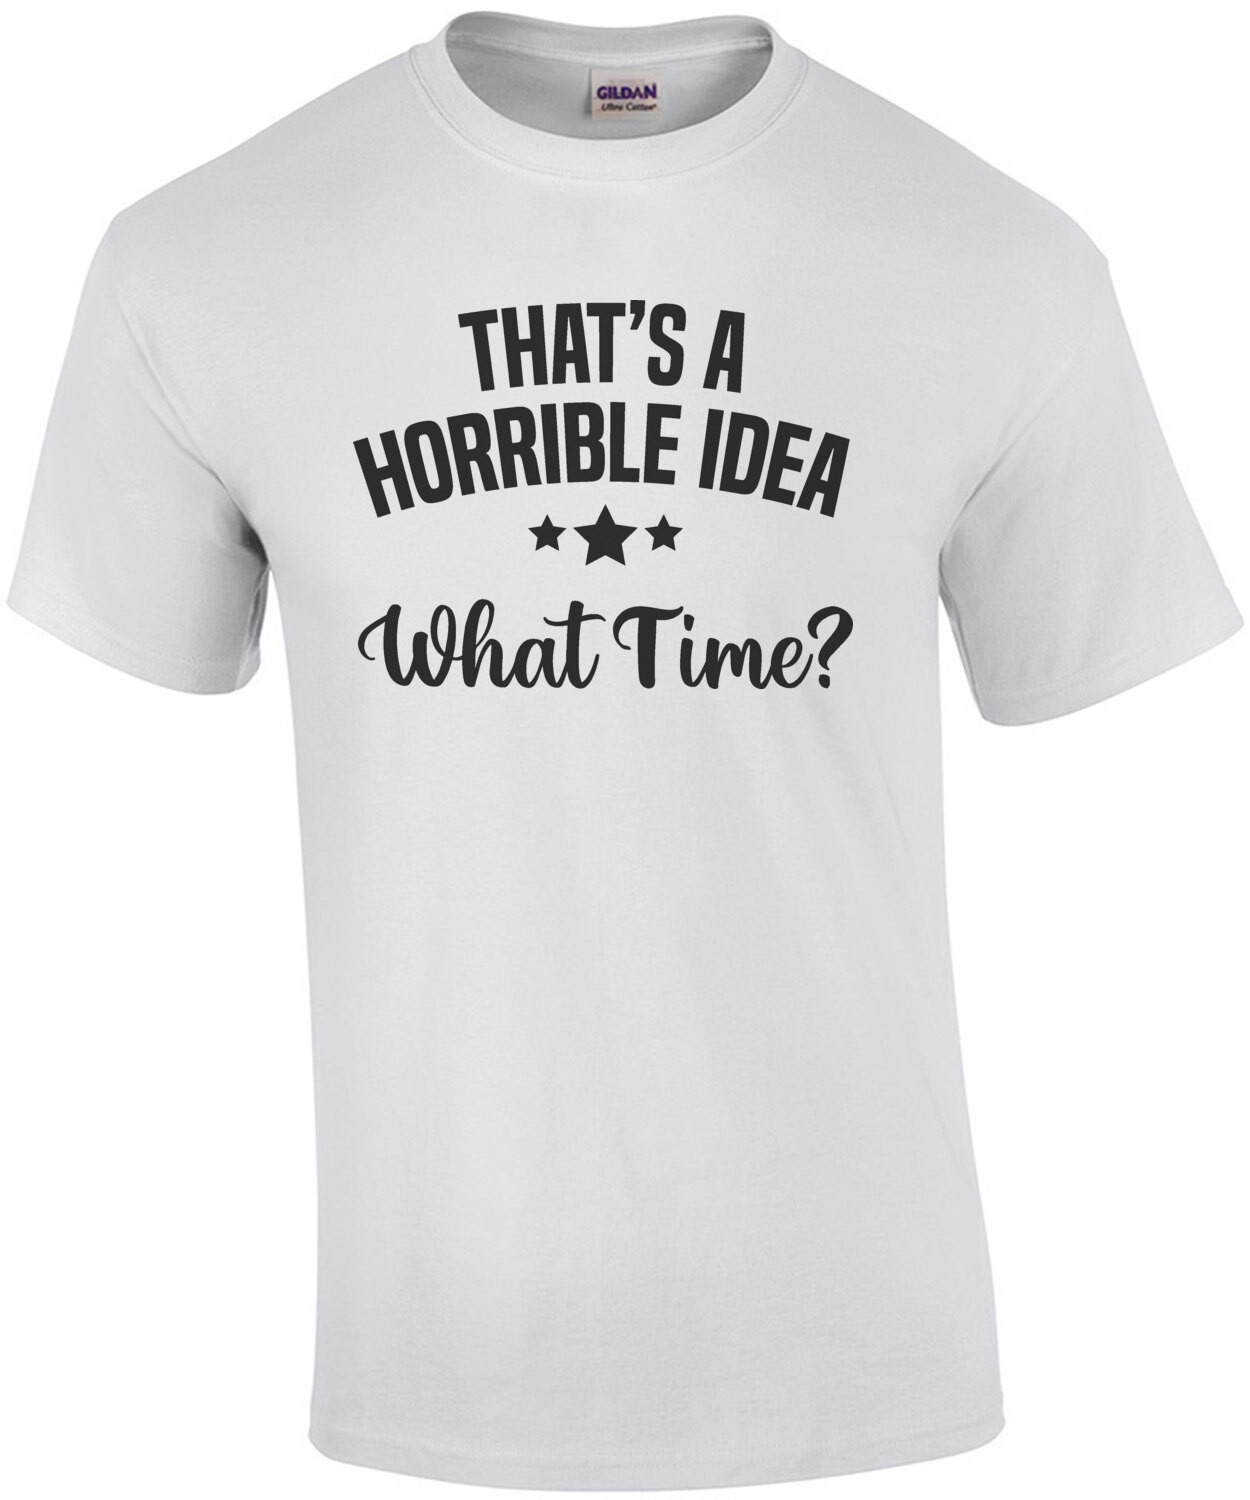 That's a horrible idea - What Time? Funny T-Shirt